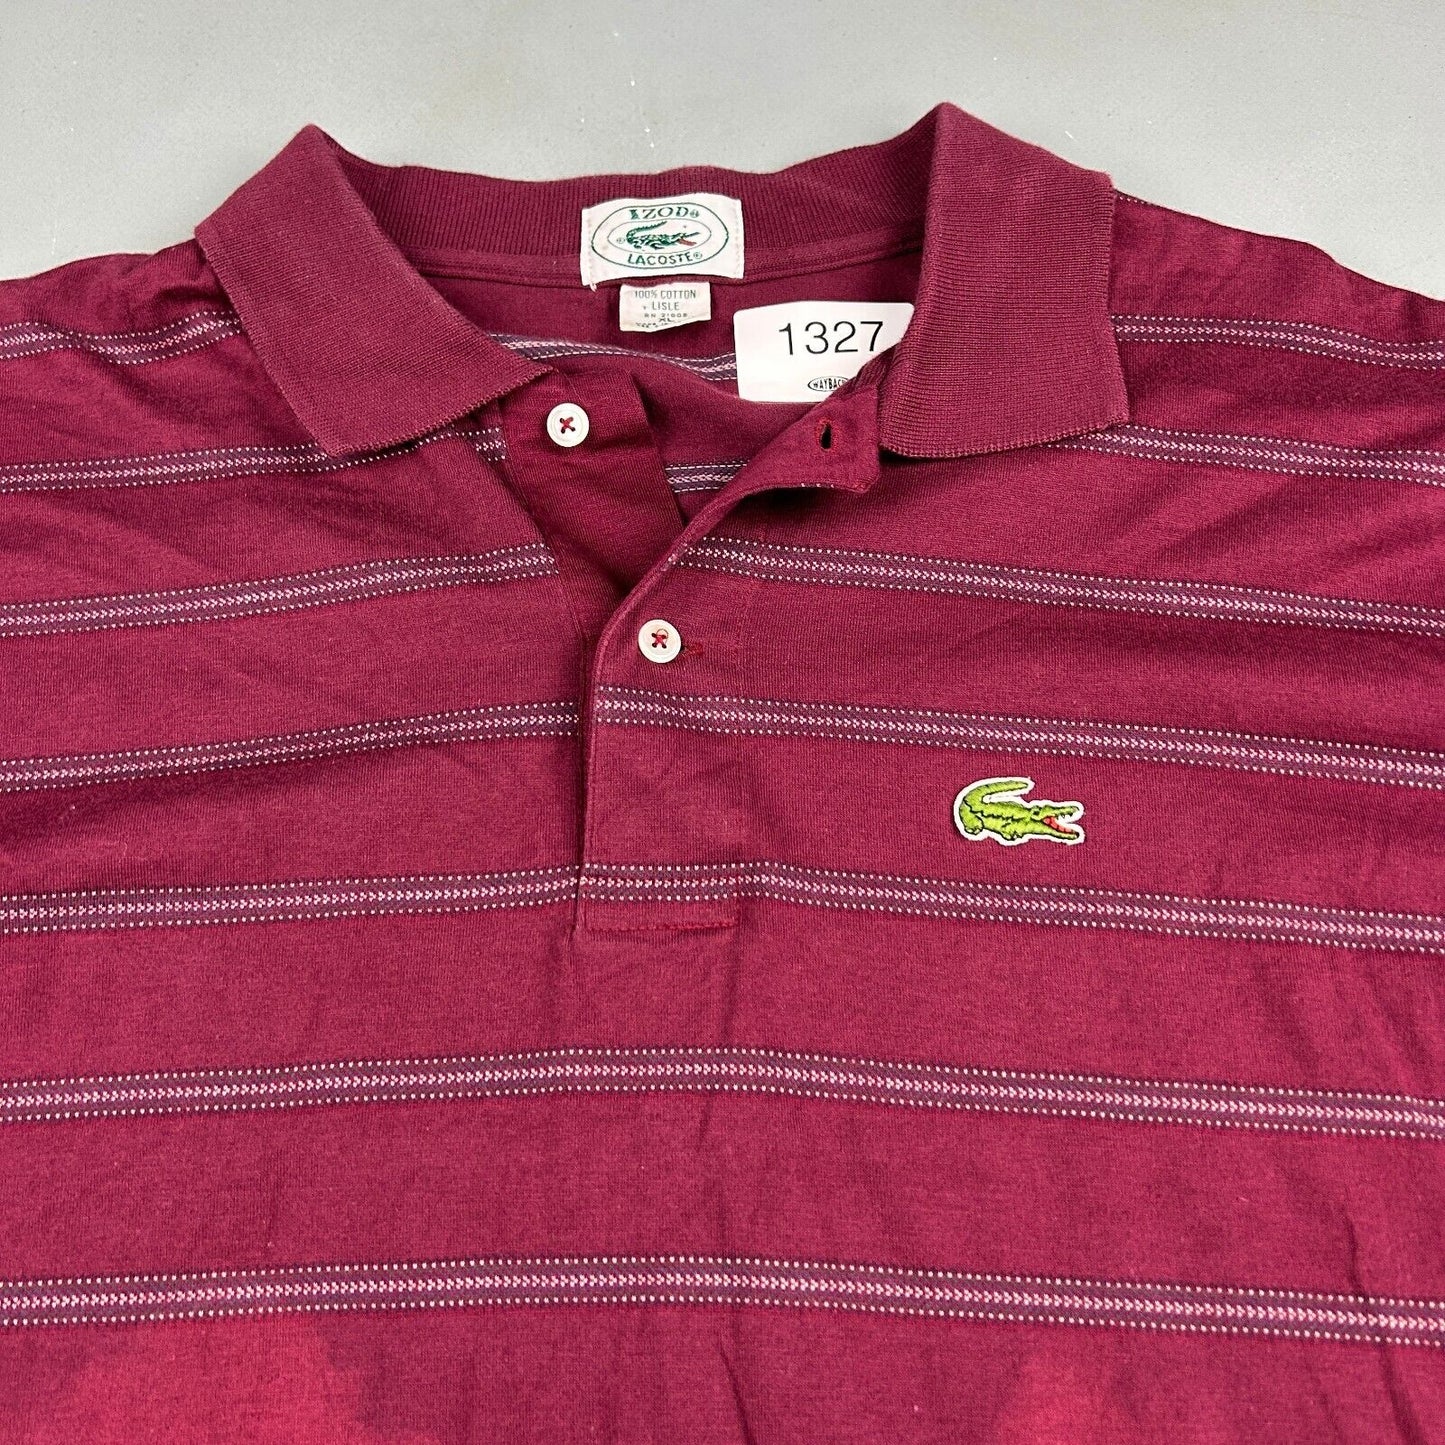 VINTAGE 90s Lacoste Sm Logo Red Striped Polo Shirt sz Large Adult